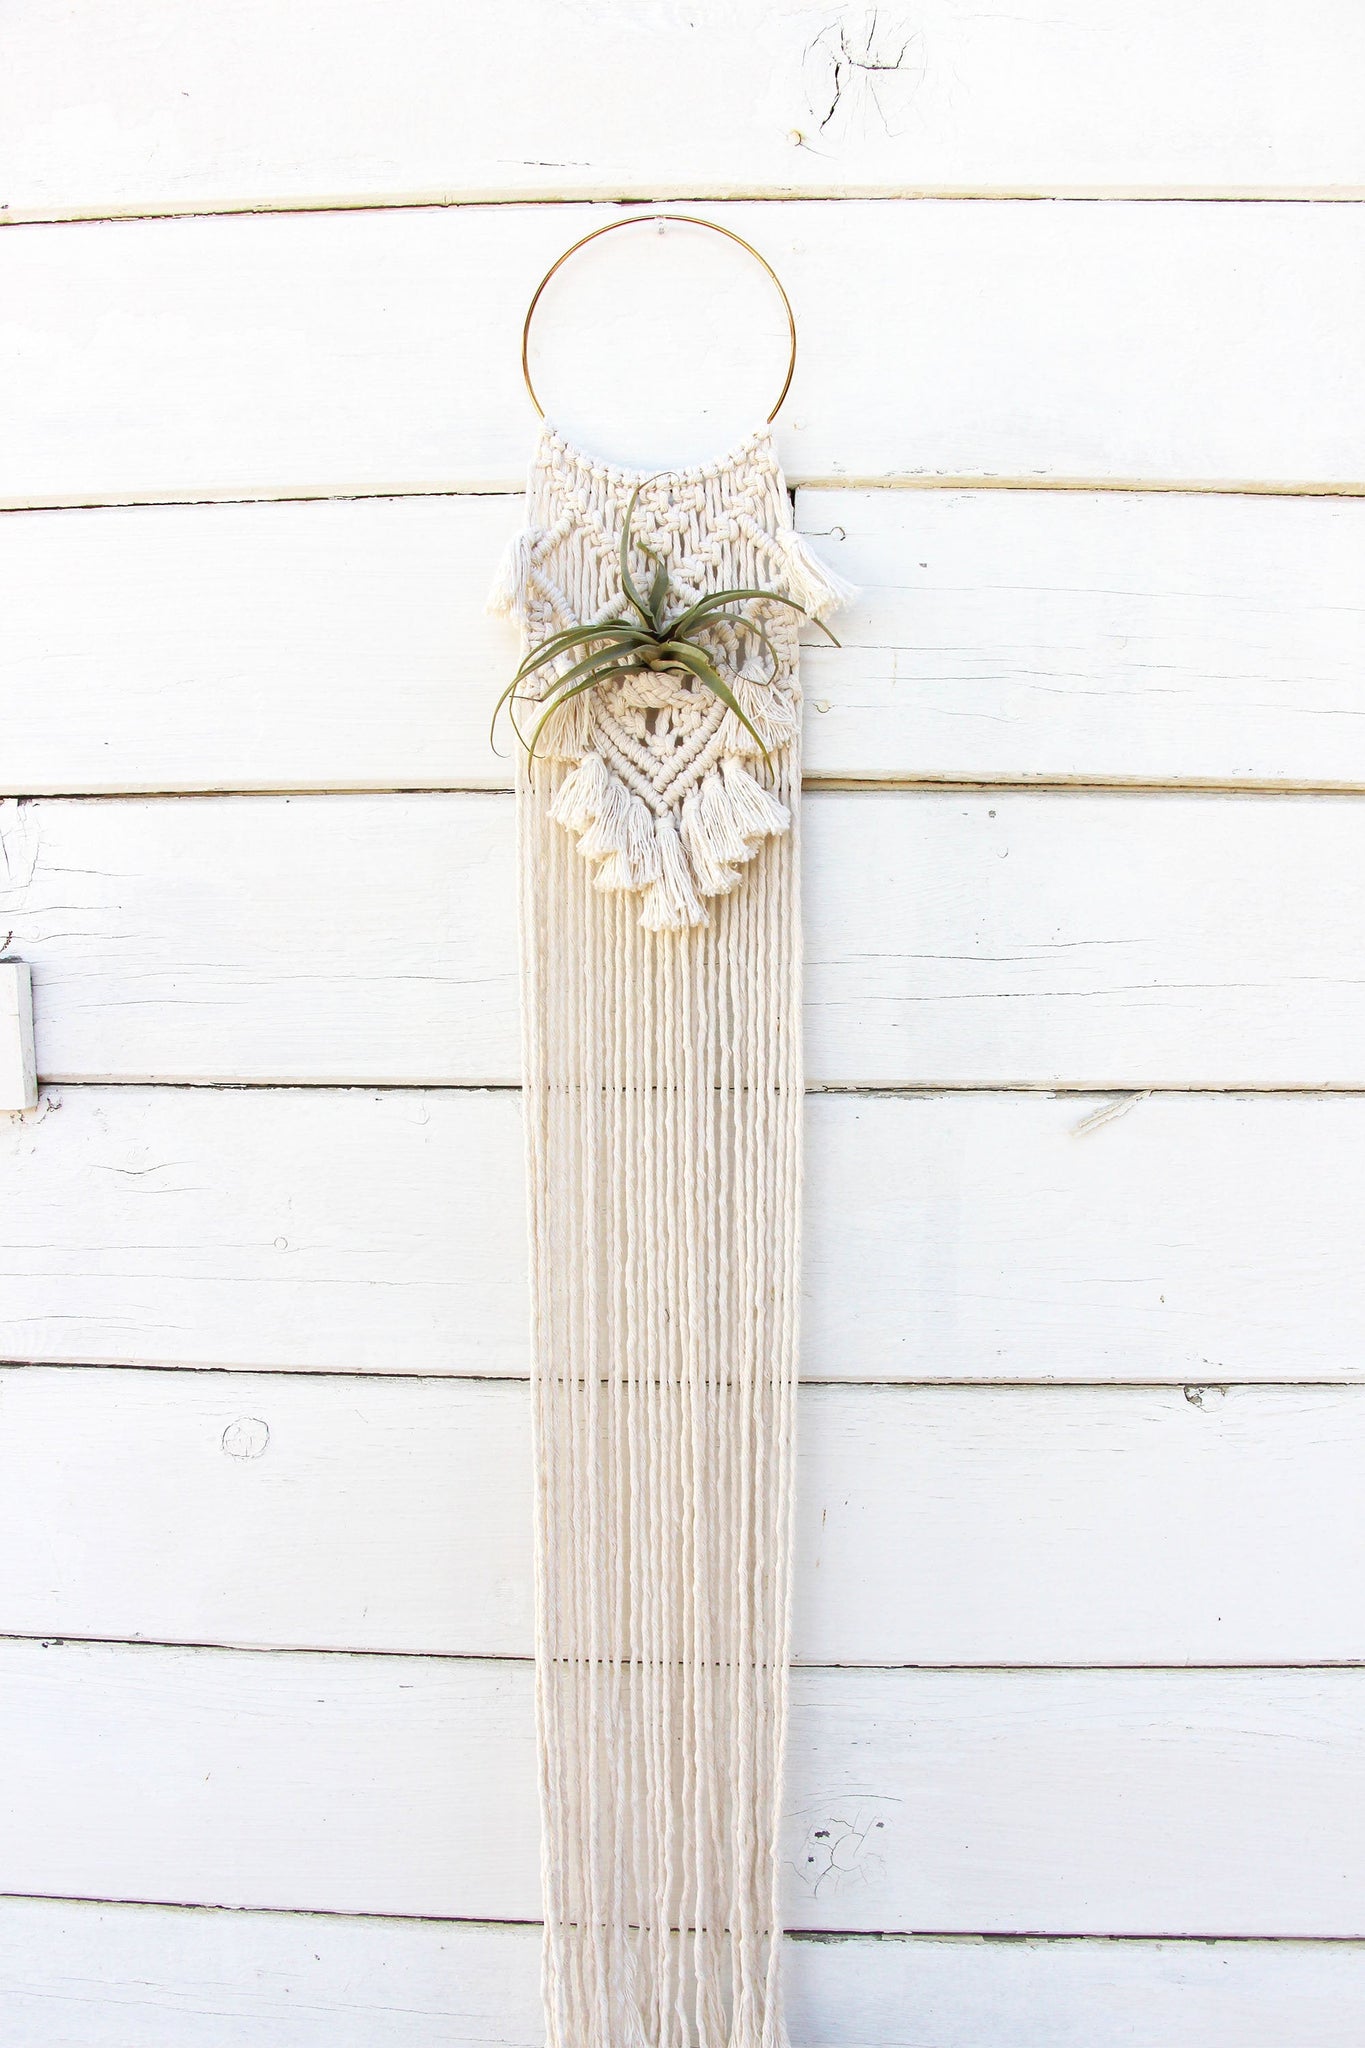 Macrame Air Plant Holder with Tassels - Sophia - White - Bohemian Home Decor Wall Hanging